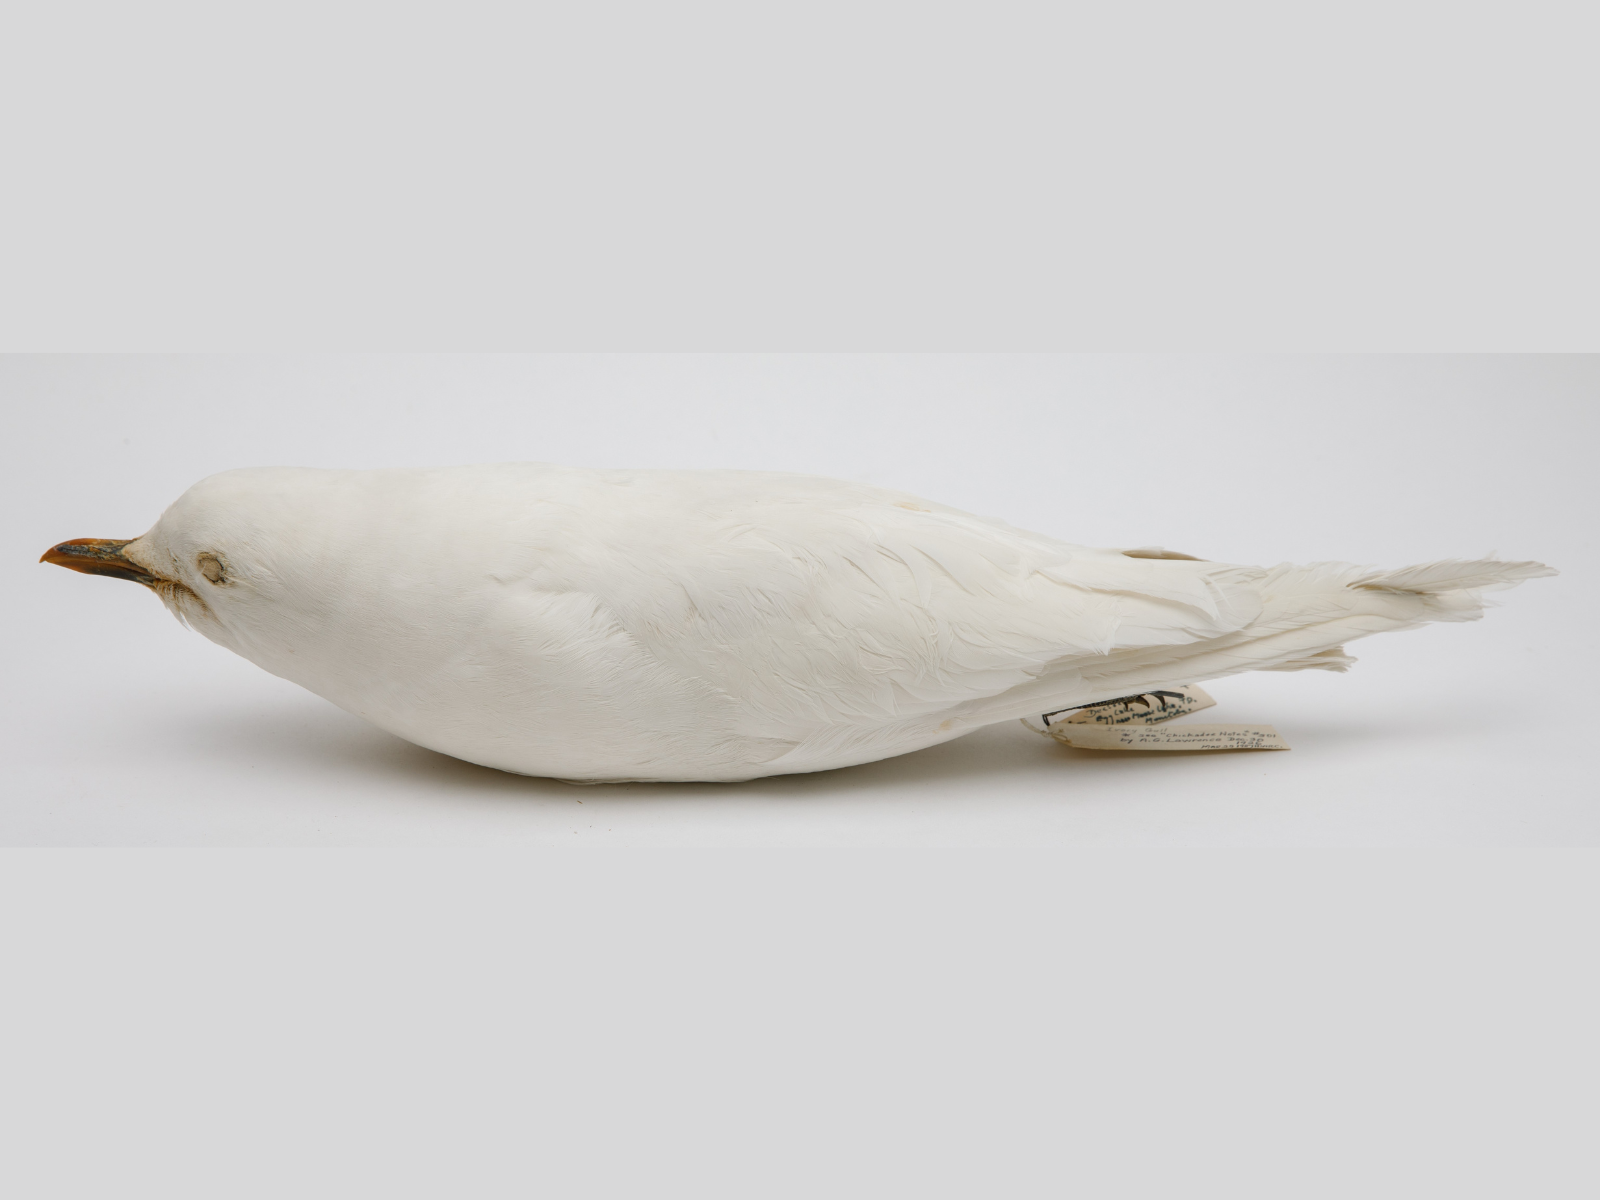 A white bird specimen with a dark beak and wings closed, lying belly-down on a light-coloured surface.